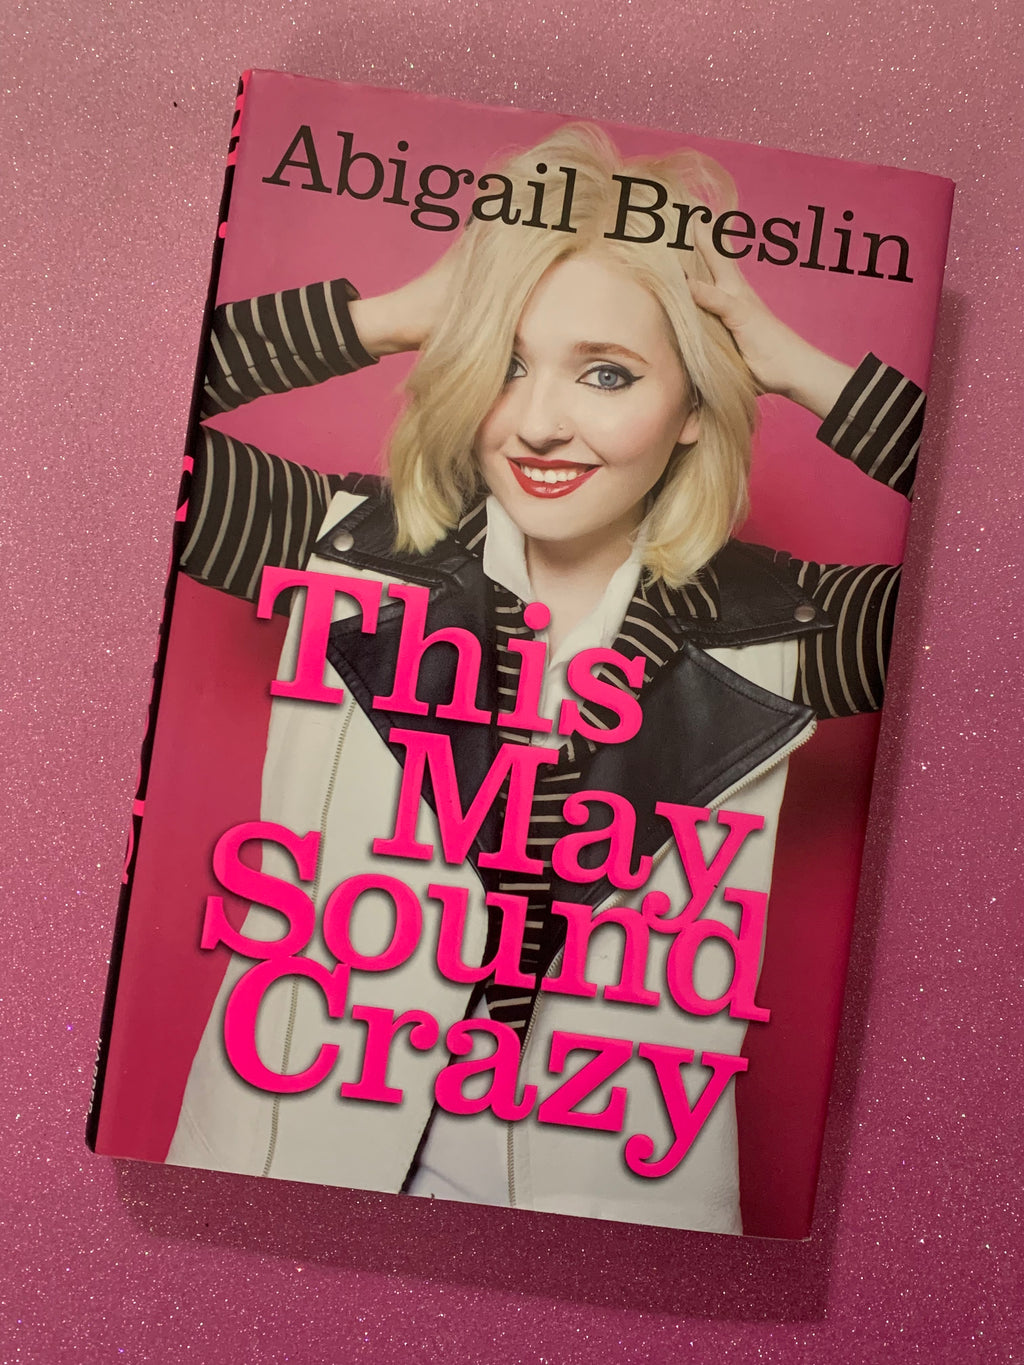 This May Sound Crazy- By Abigail Breslin